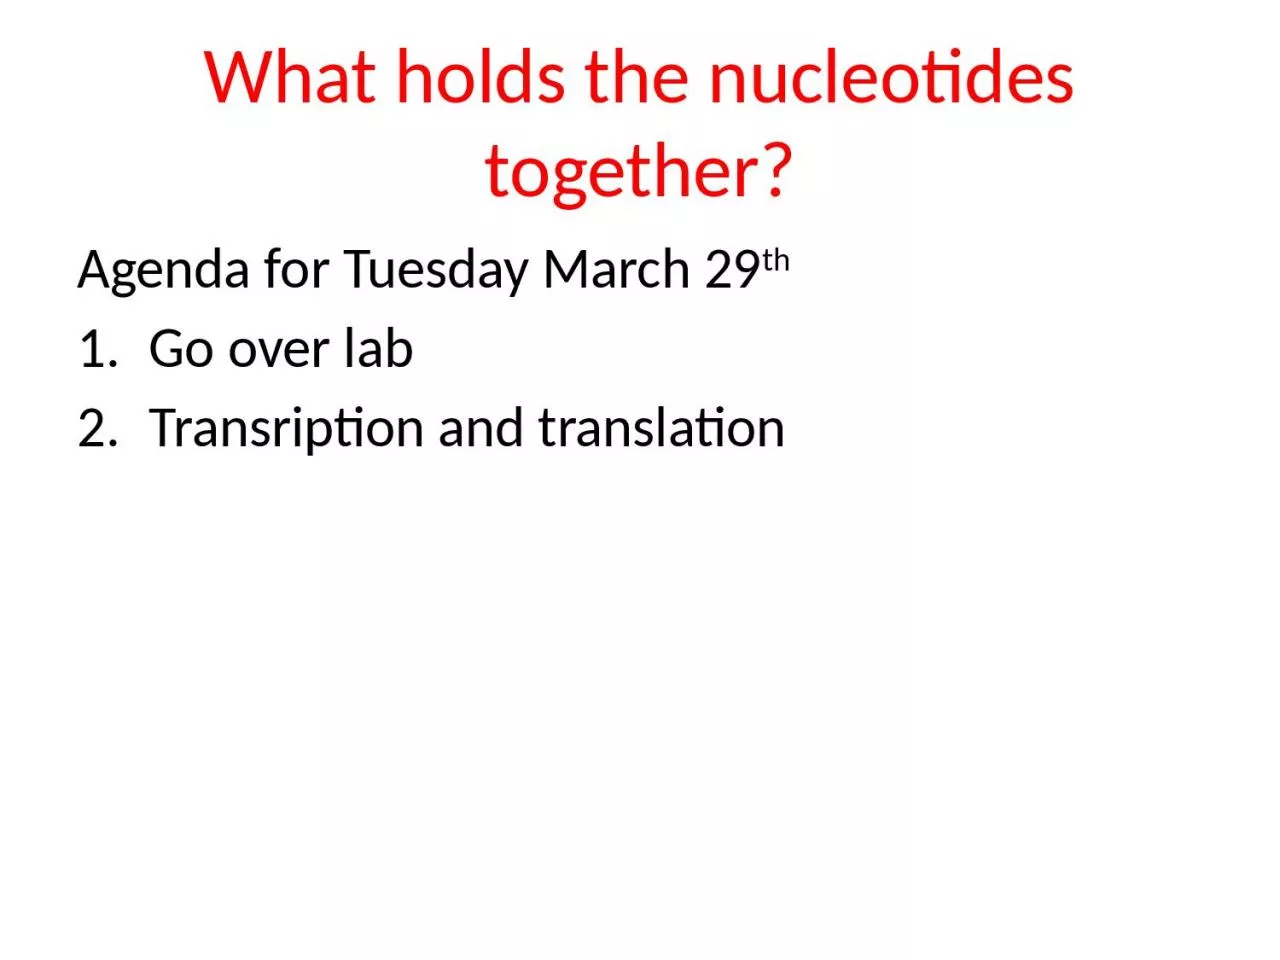 What holds the nucleotides together?